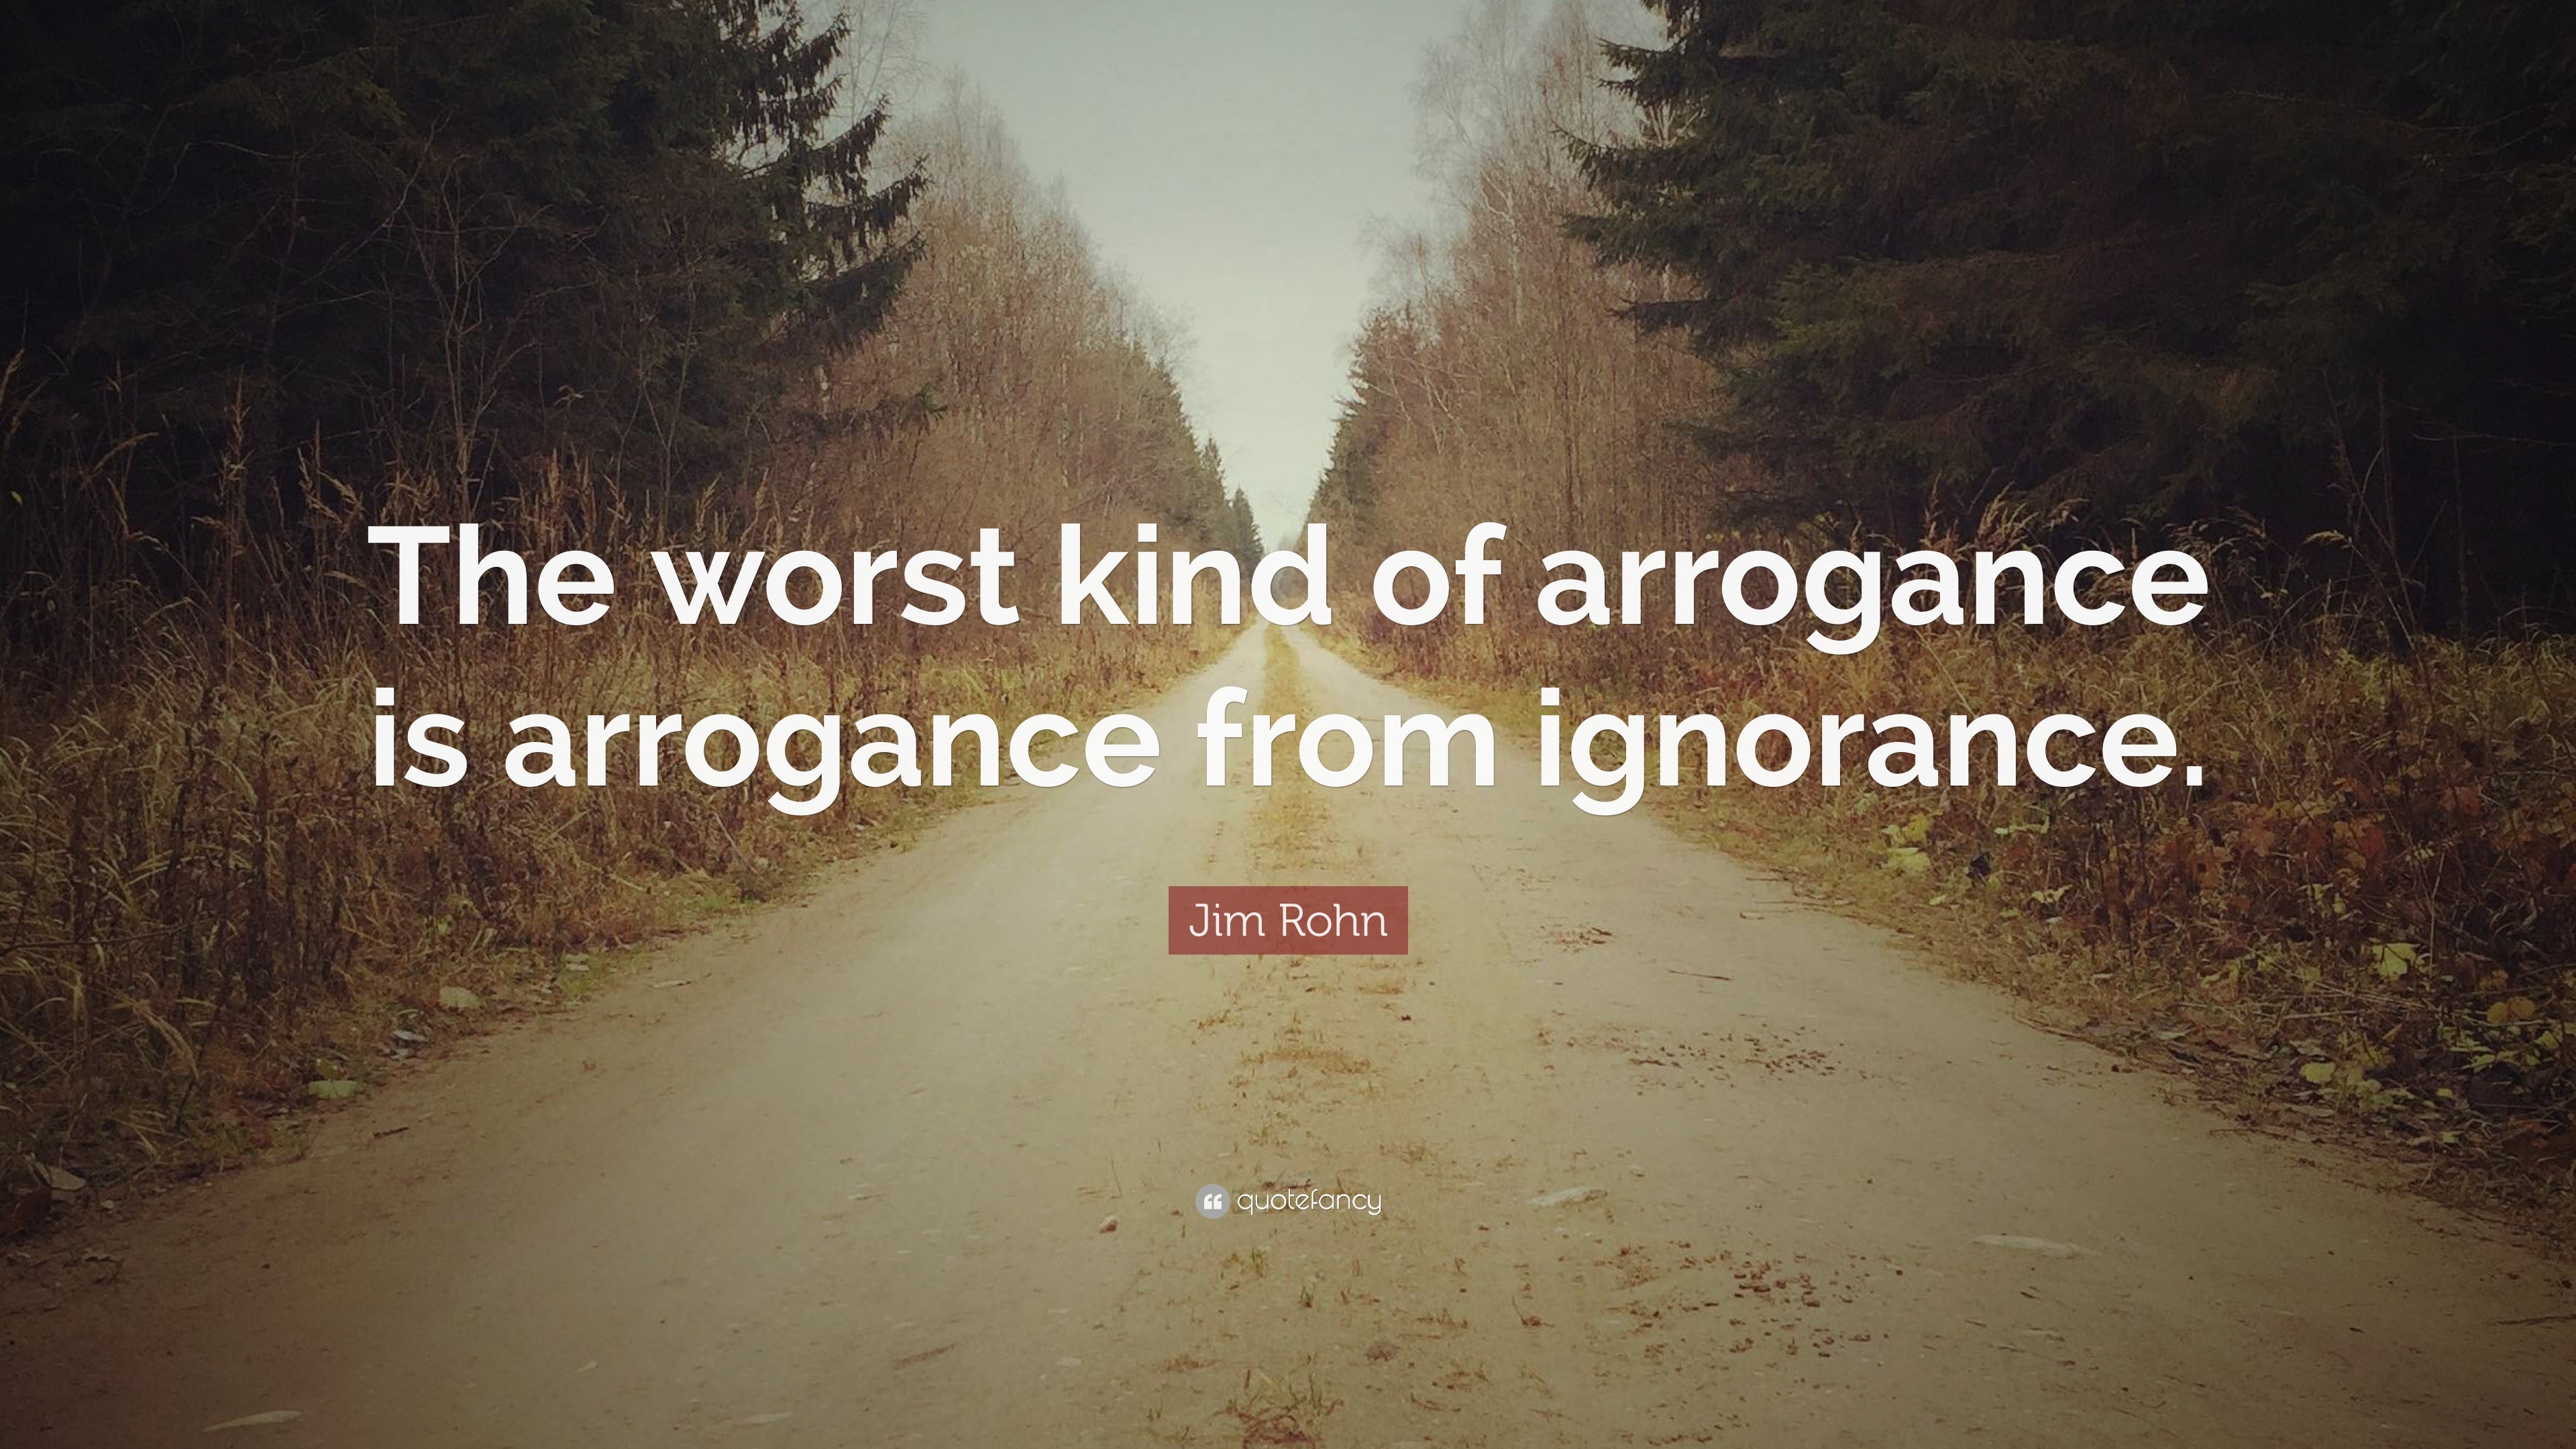 Ignorance Quotes (40 wallpapers) - Quotefancy